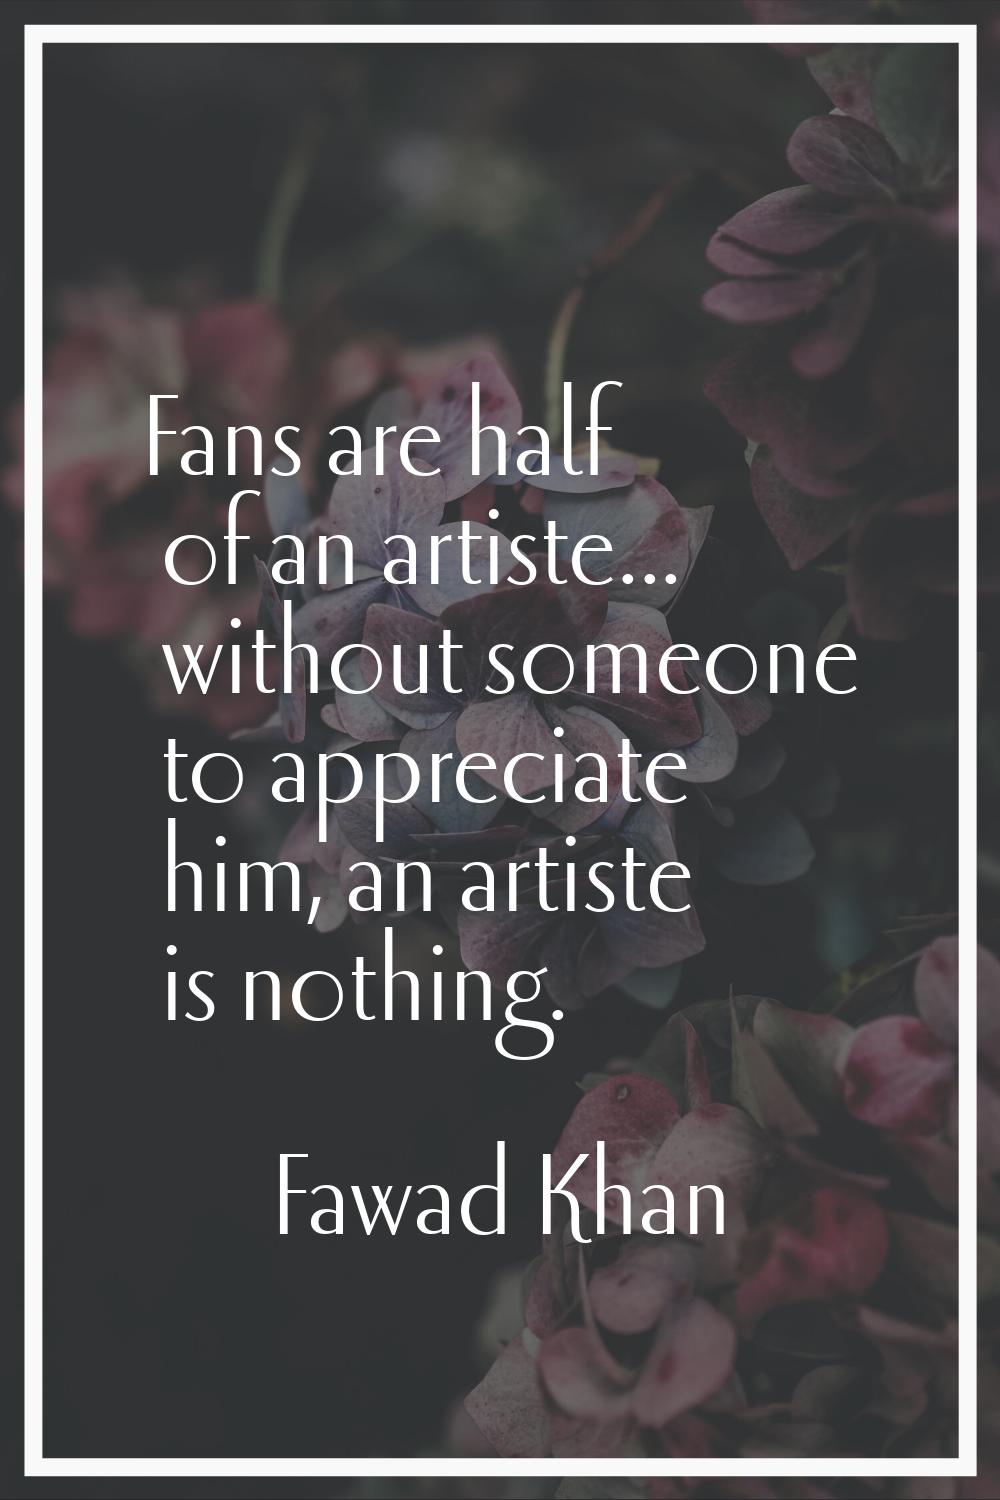 Fans are half of an artiste... without someone to appreciate him, an artiste is nothing.